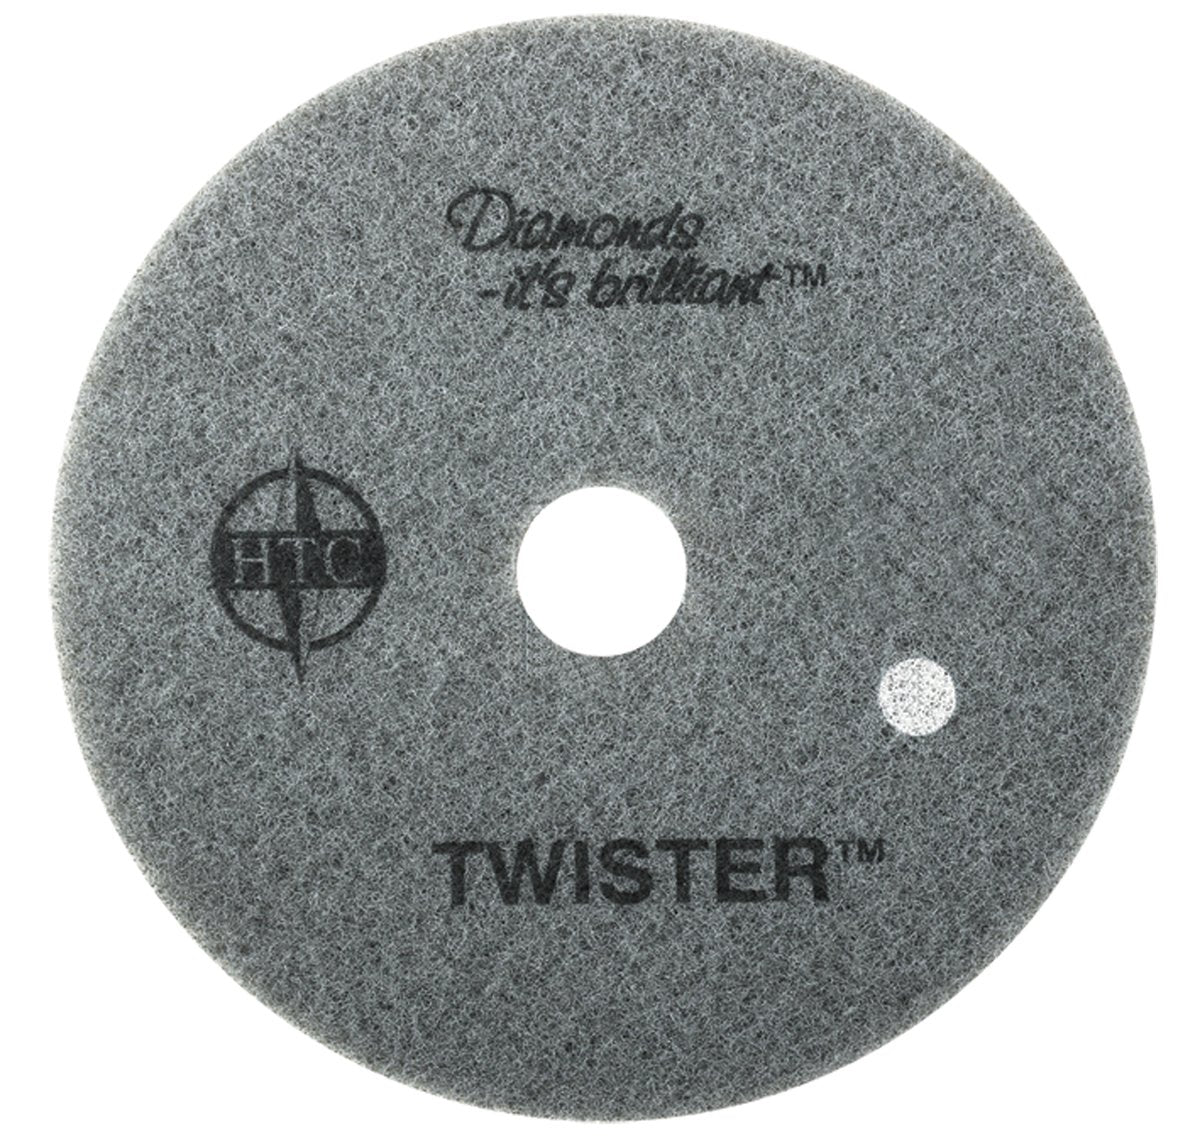 Americo Manufacturing 435320 Twister White 800 Grit Floor Pad for Step 1 Deep Cleaning (2 Pack), 20" - CalCleaningEquipment